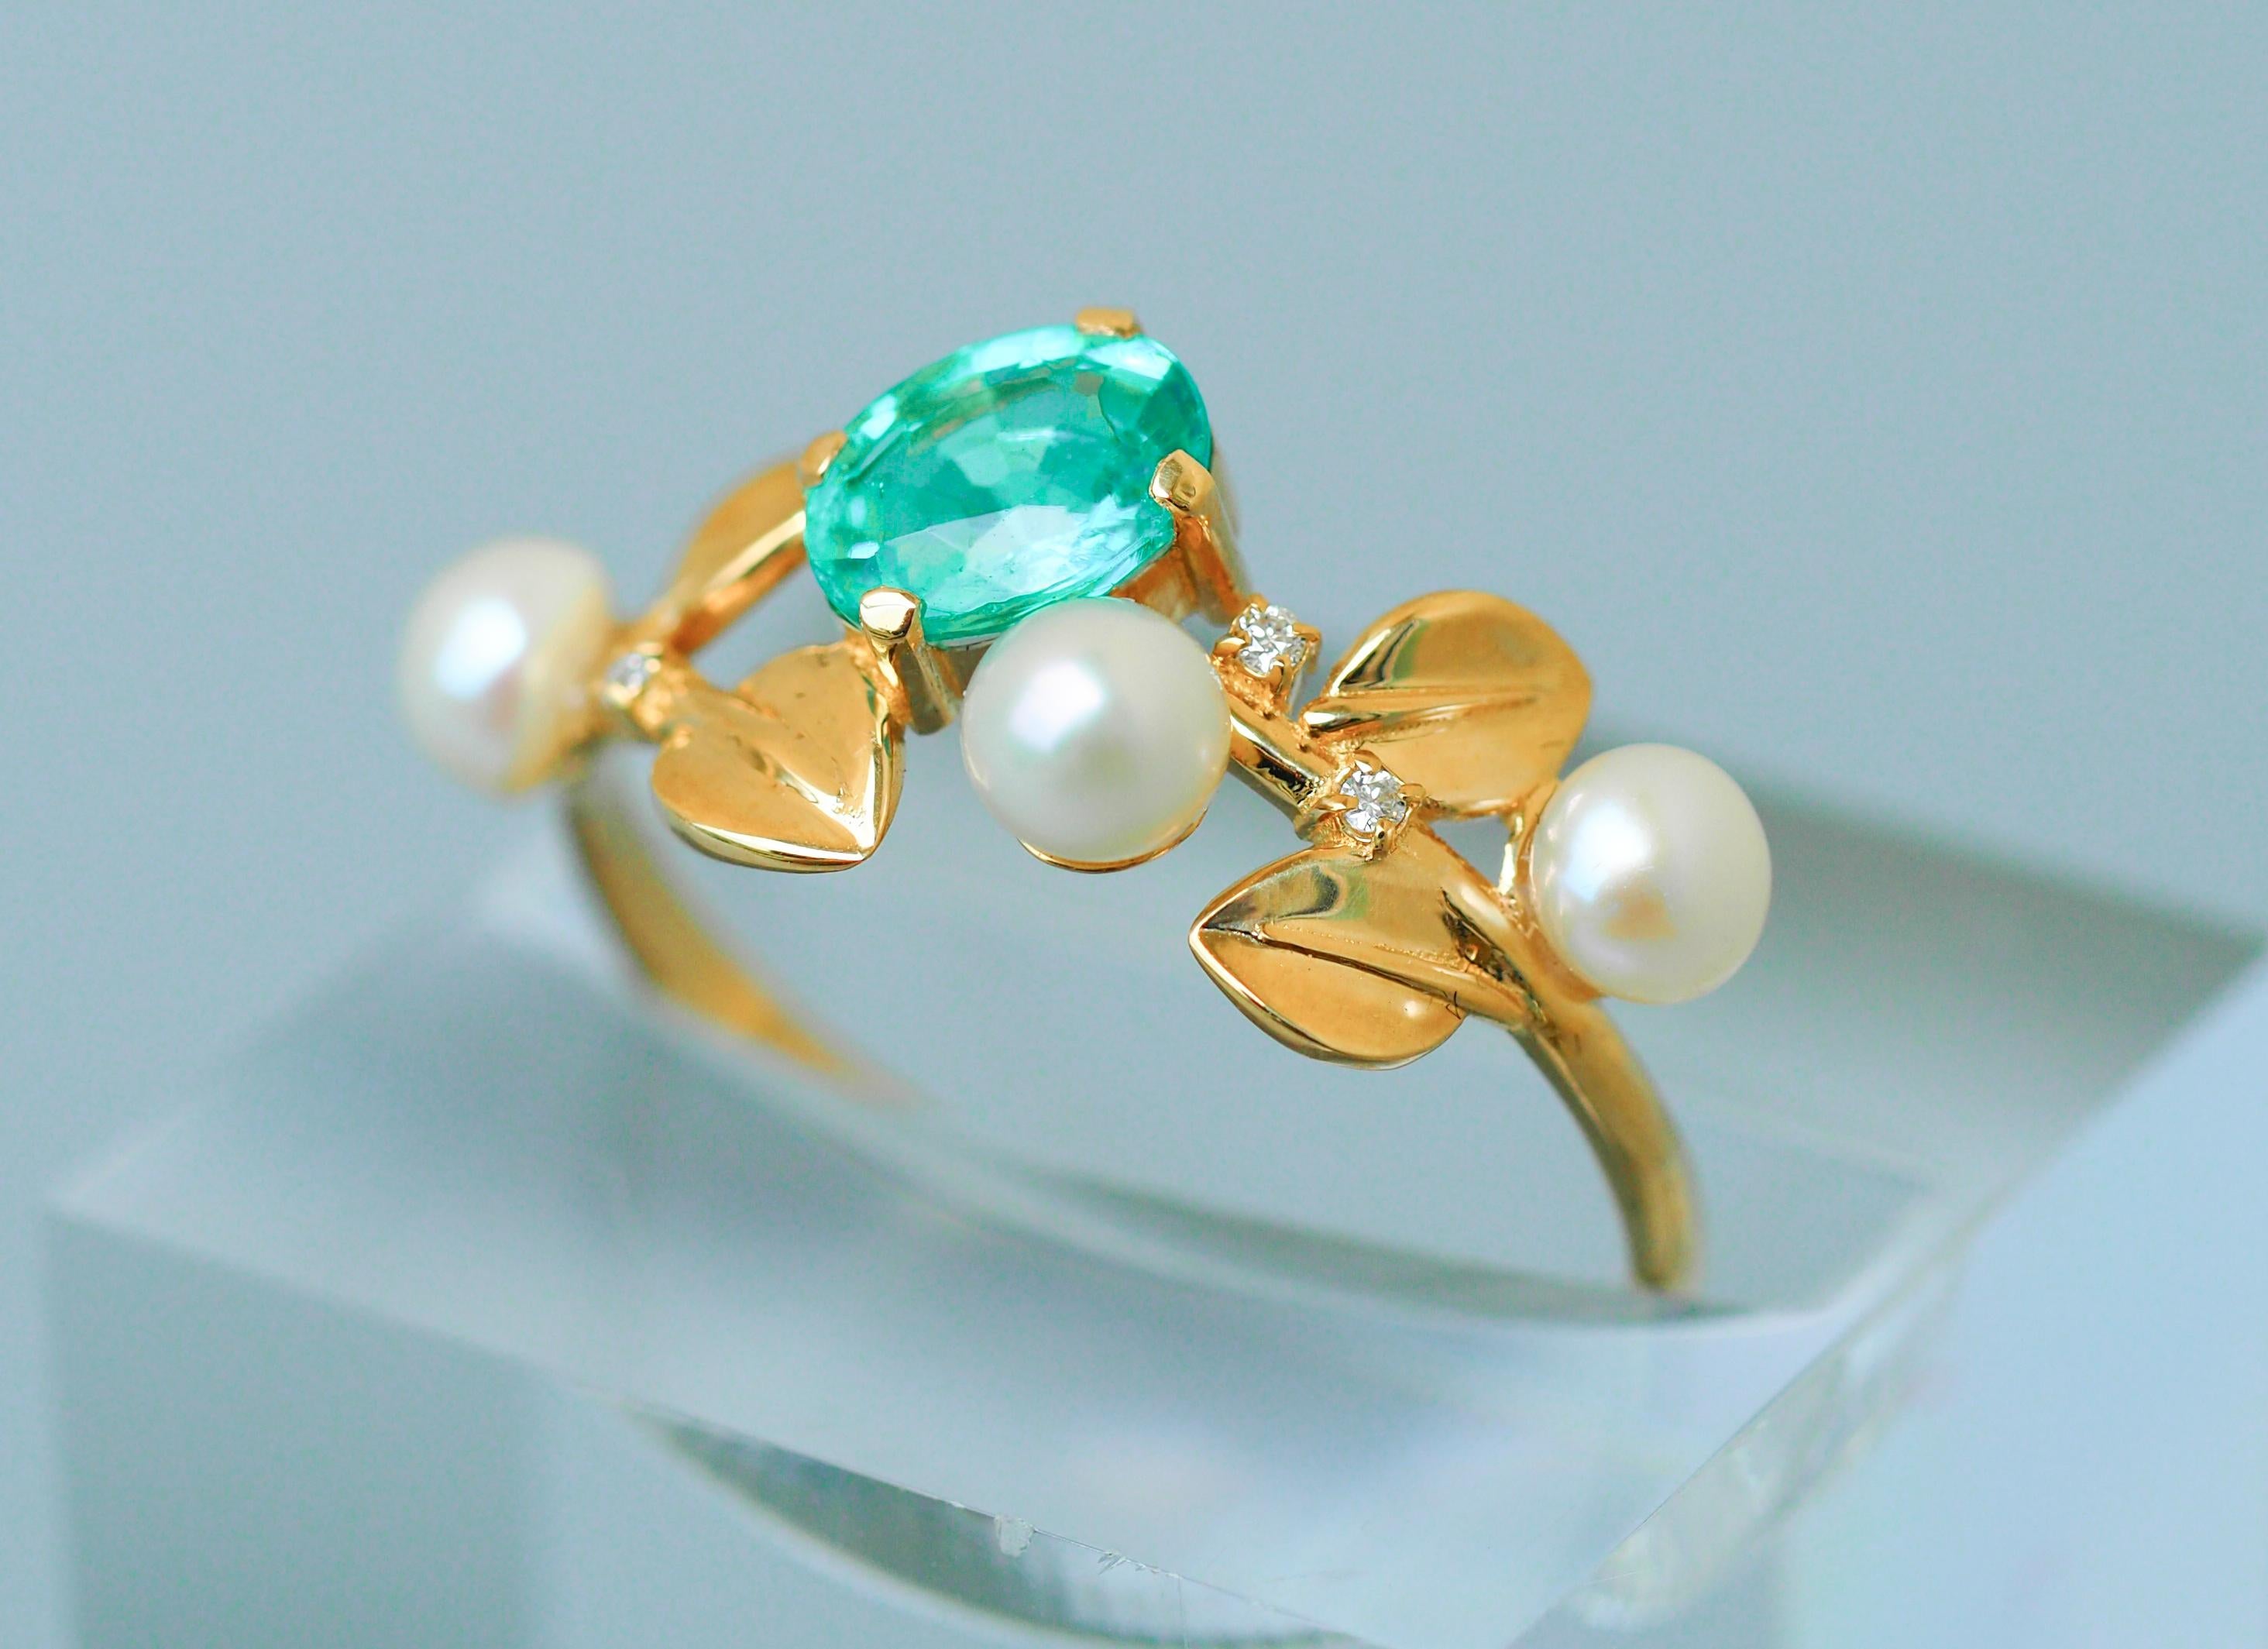 For Sale:  14k Gold Floral Ring with Oval Apatite, Diamonds and Pearls 3